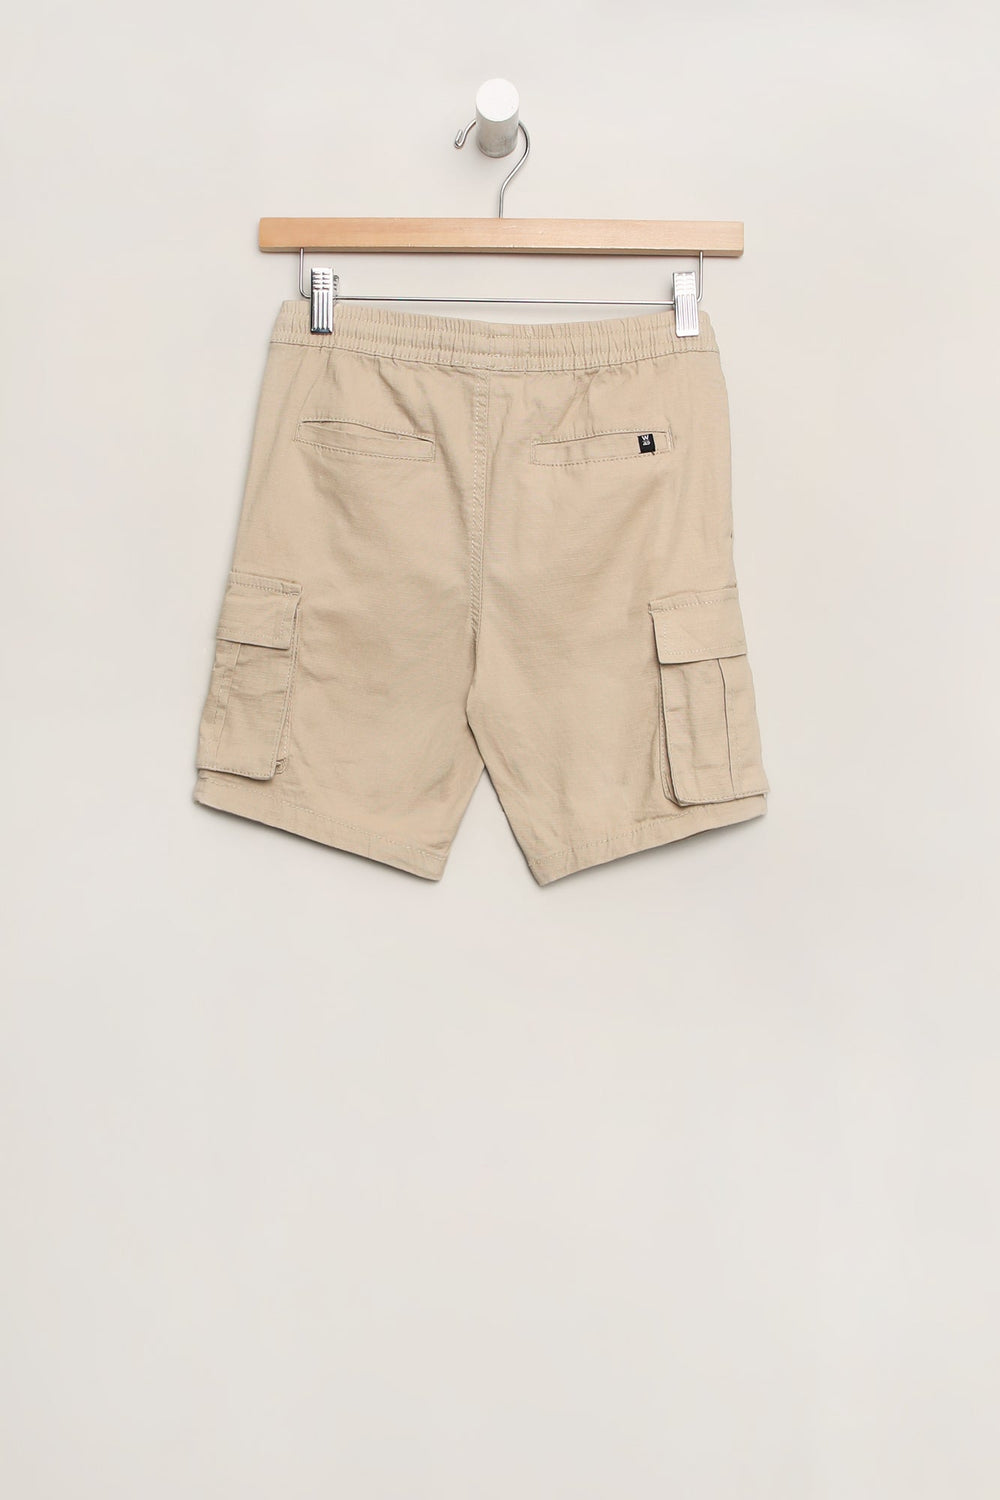 West49 Youth Solid Colour Cargo Jogger Short West49 Youth Solid Colour Cargo Jogger Short